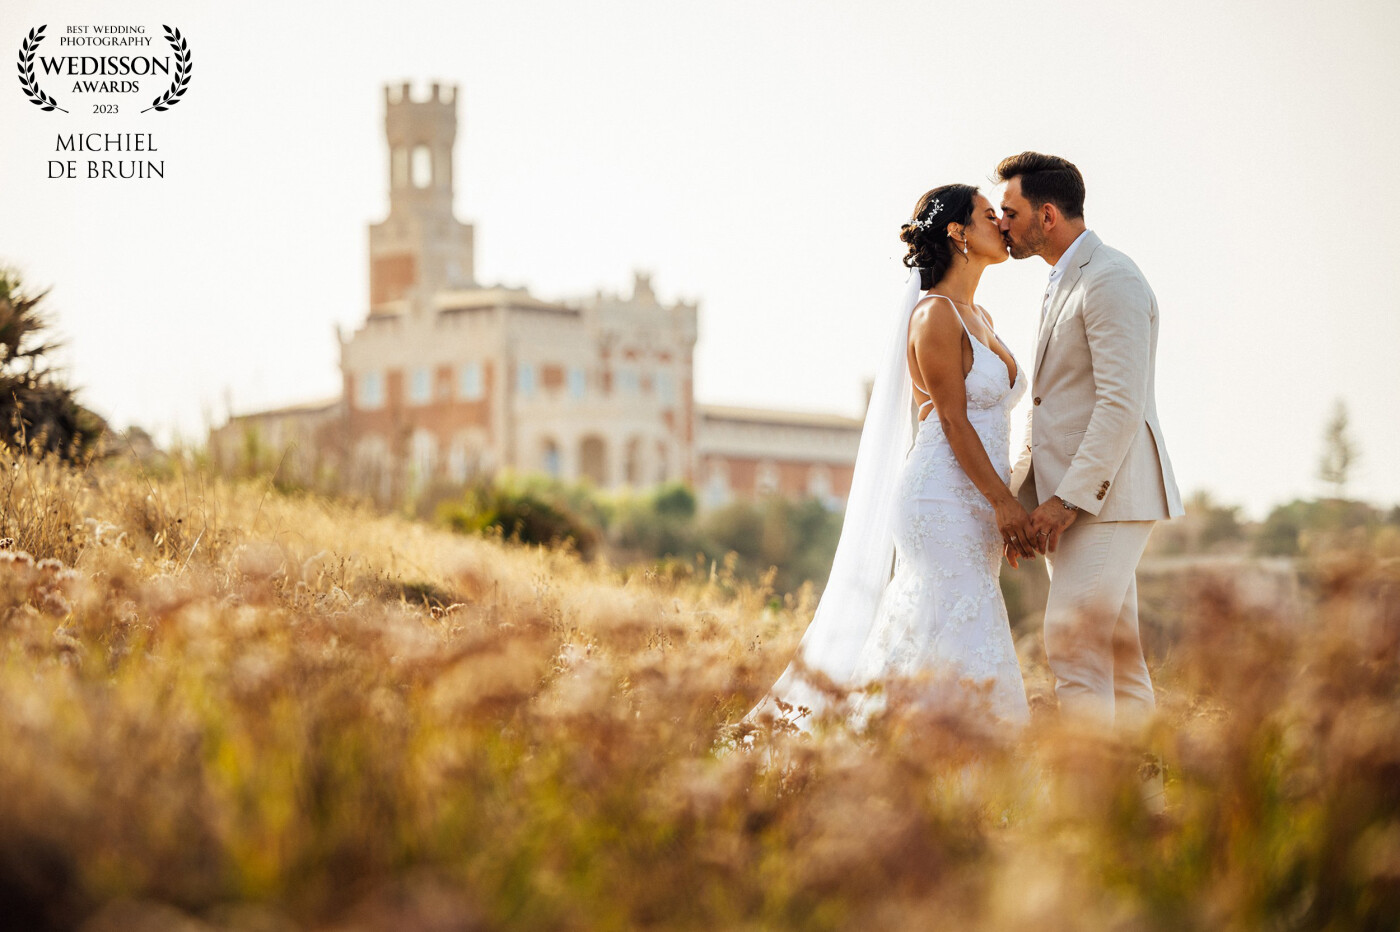 I simply love Italian weddings! The great scenery, summer colours and great atmosphere makes the photoshoot even more joyful. This lovely couple had an amazing Sicilian wedding and made me feel like I was part of their family.